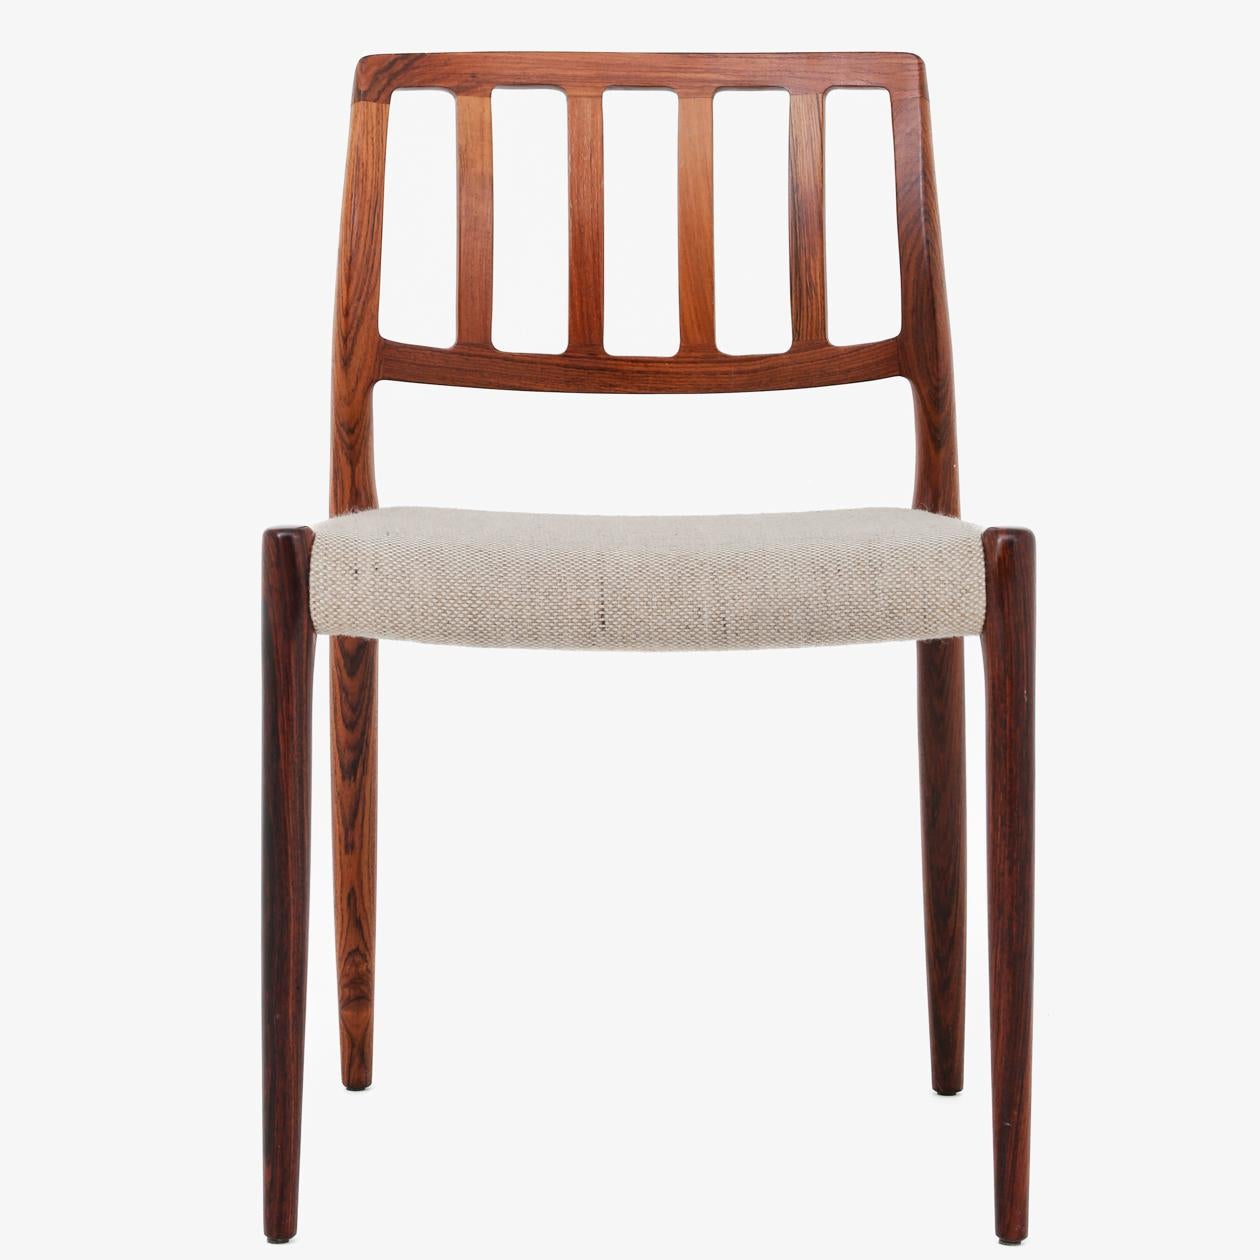 NO 83 - Set of 8 dining chairs in rosewood and seat in light wool. Niels O. Møller / J. L. Møller.